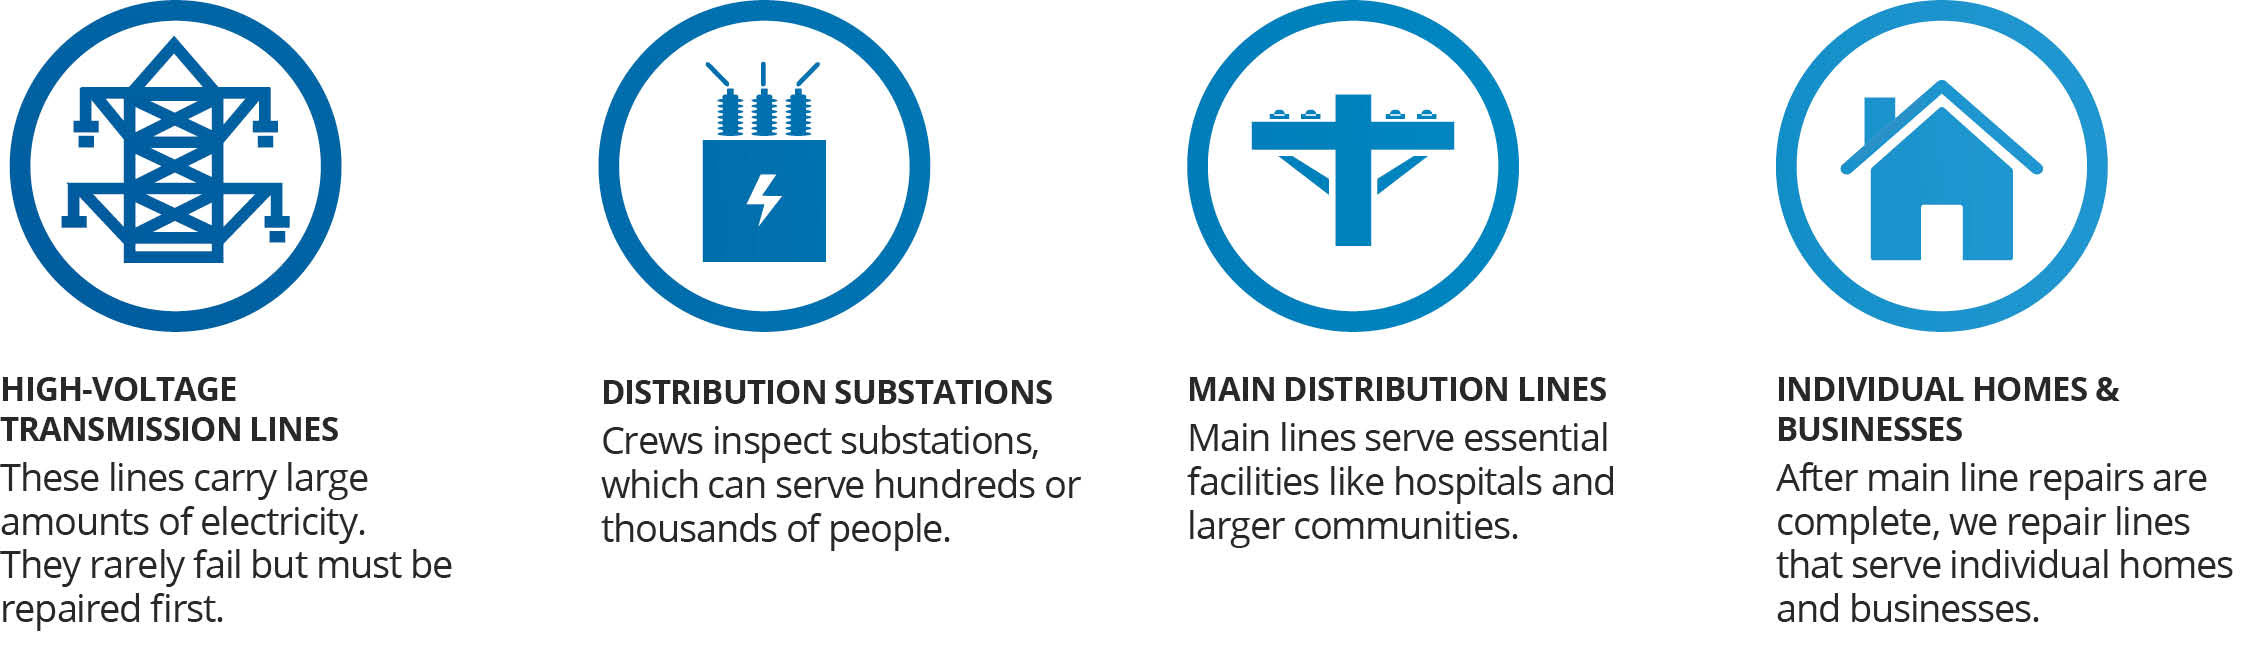 The order of operations for Dakota Electric to fix a Power Outage: high-voltage transmission lines first, then distribution stations, followed by main distribution lines, and finally individual homes & businesses